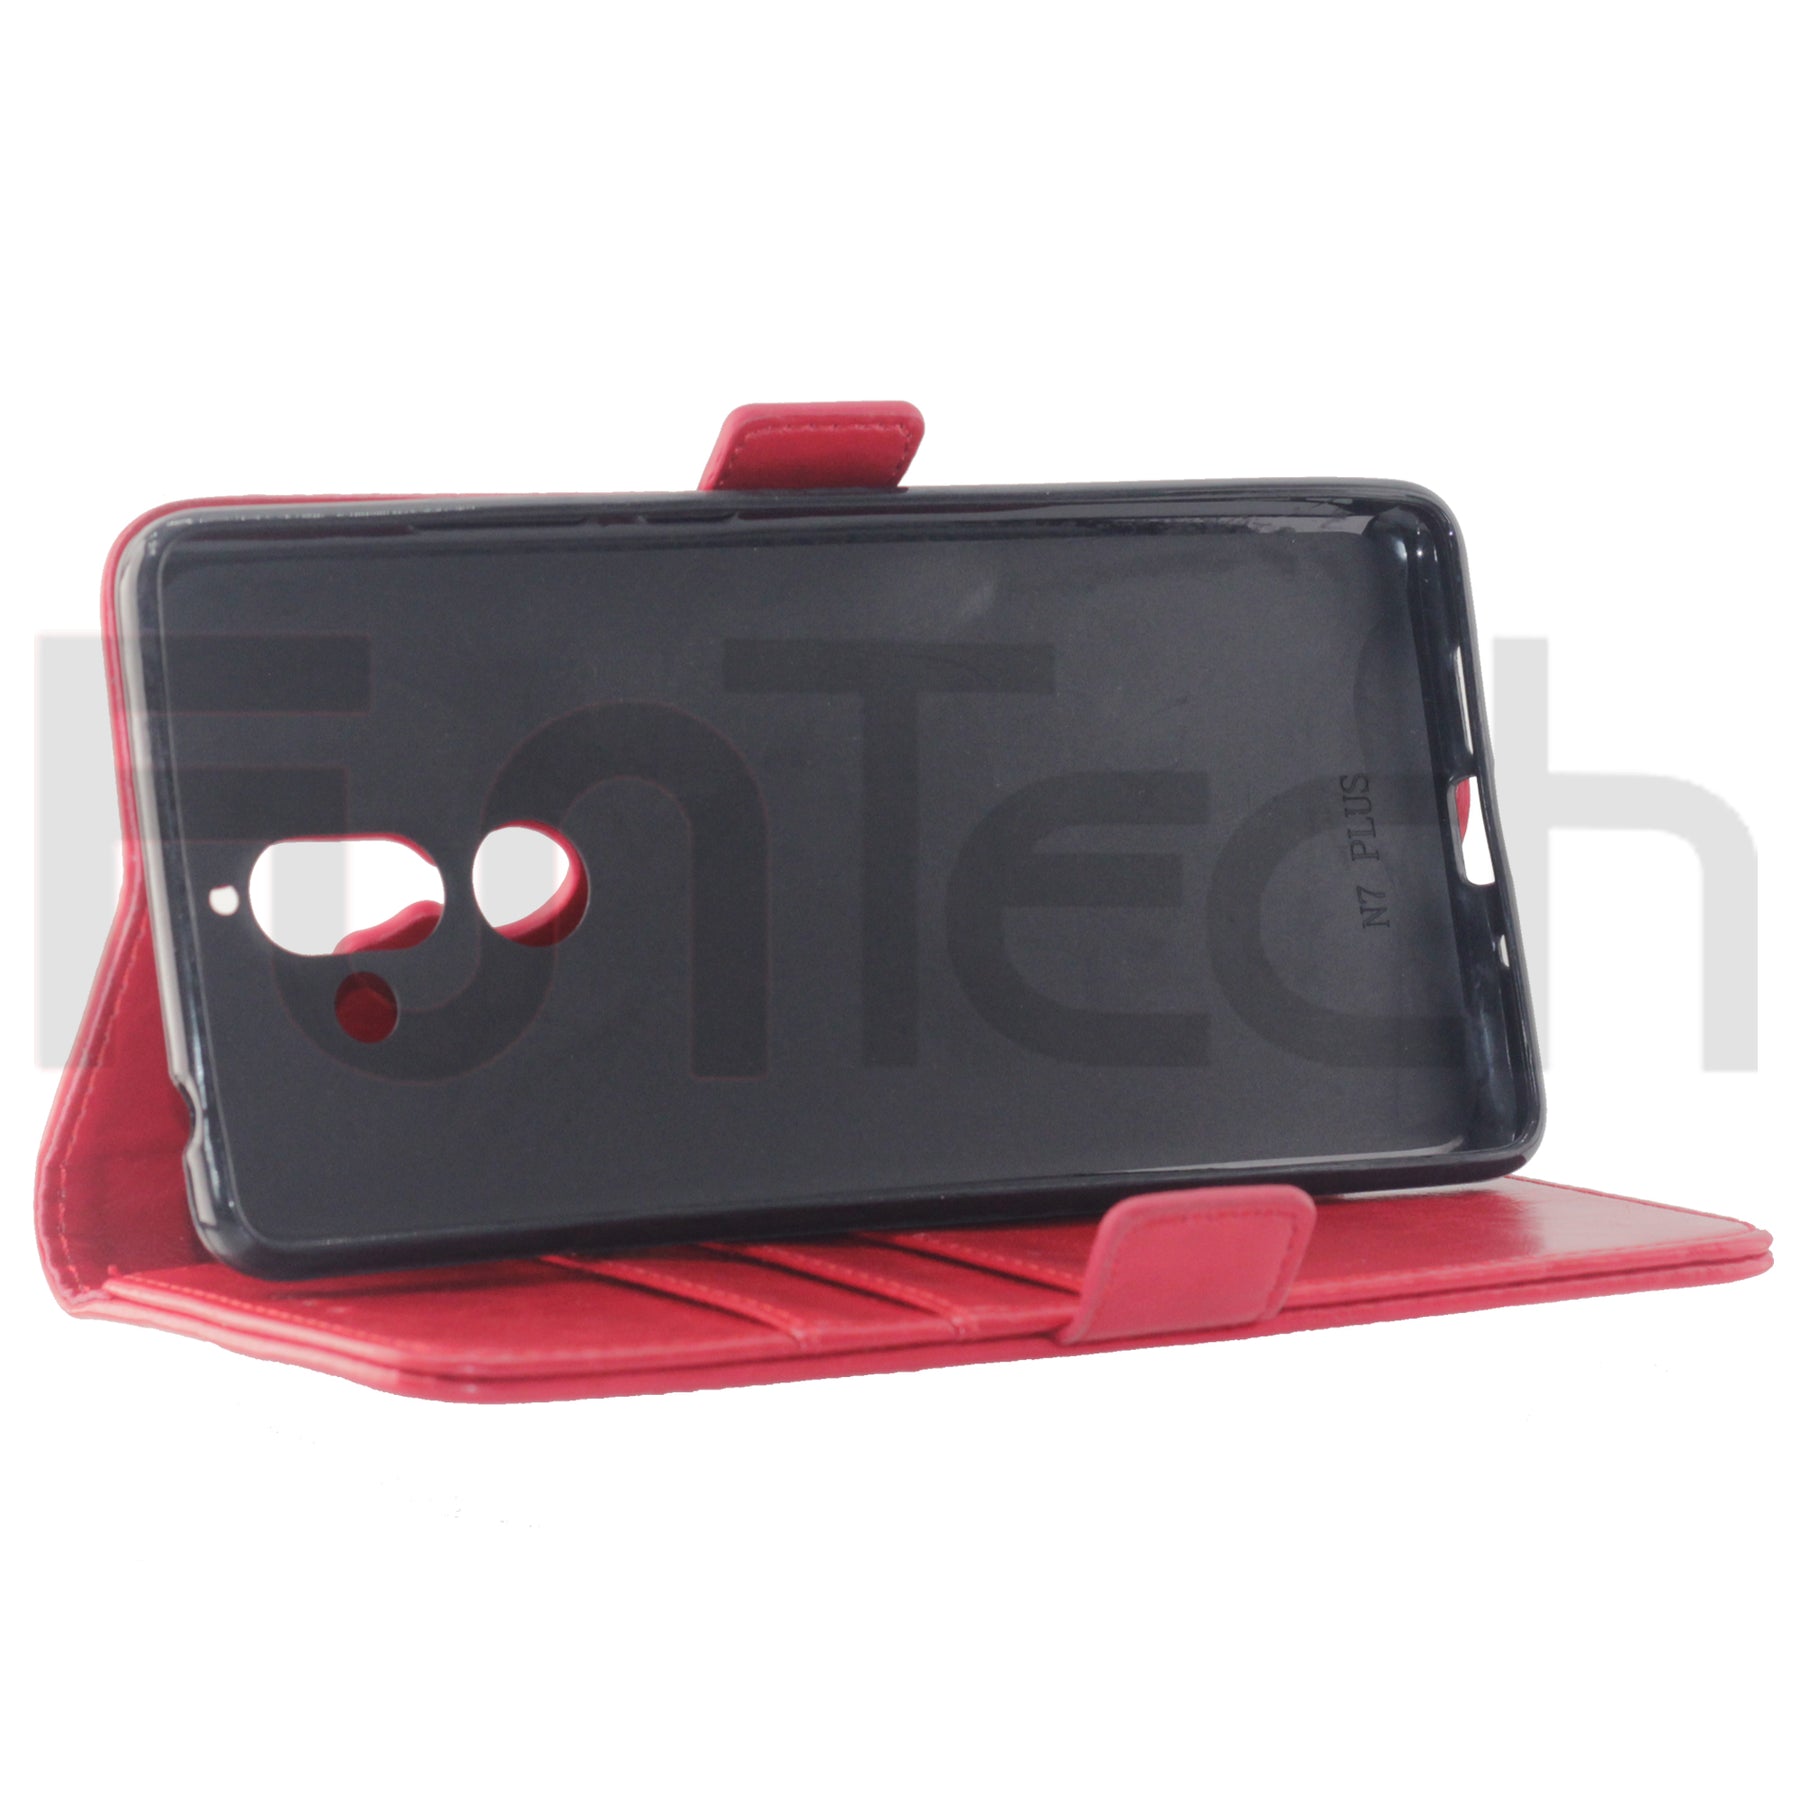 Nokia 7 Plus, Leather Wallet Case, Color Red.